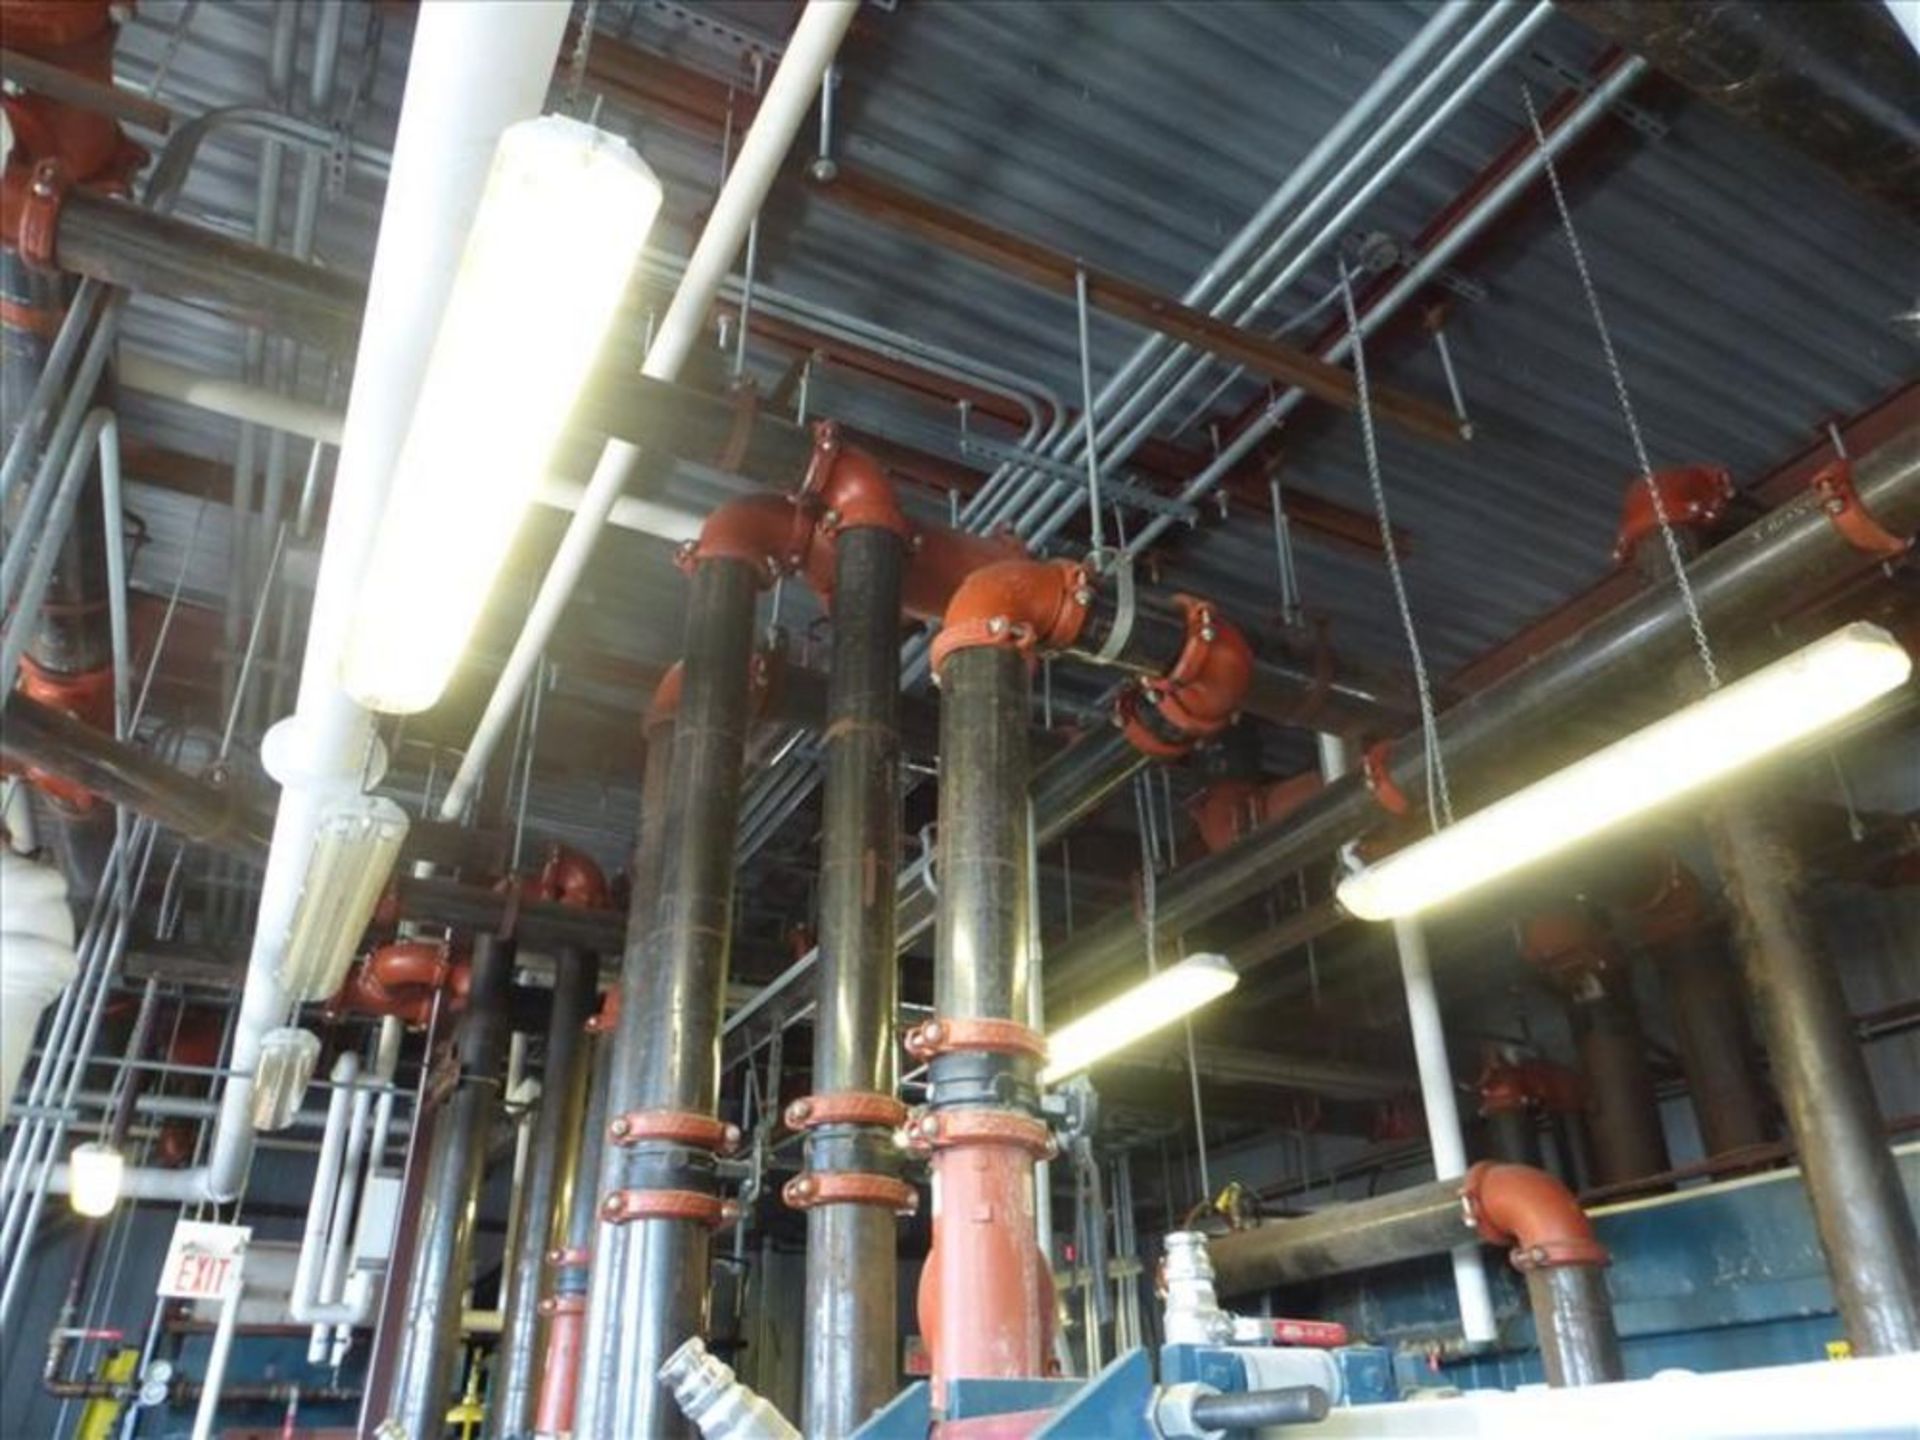 various steel process piping within building including victaulic elbows, connectors, valves, - Image 2 of 3